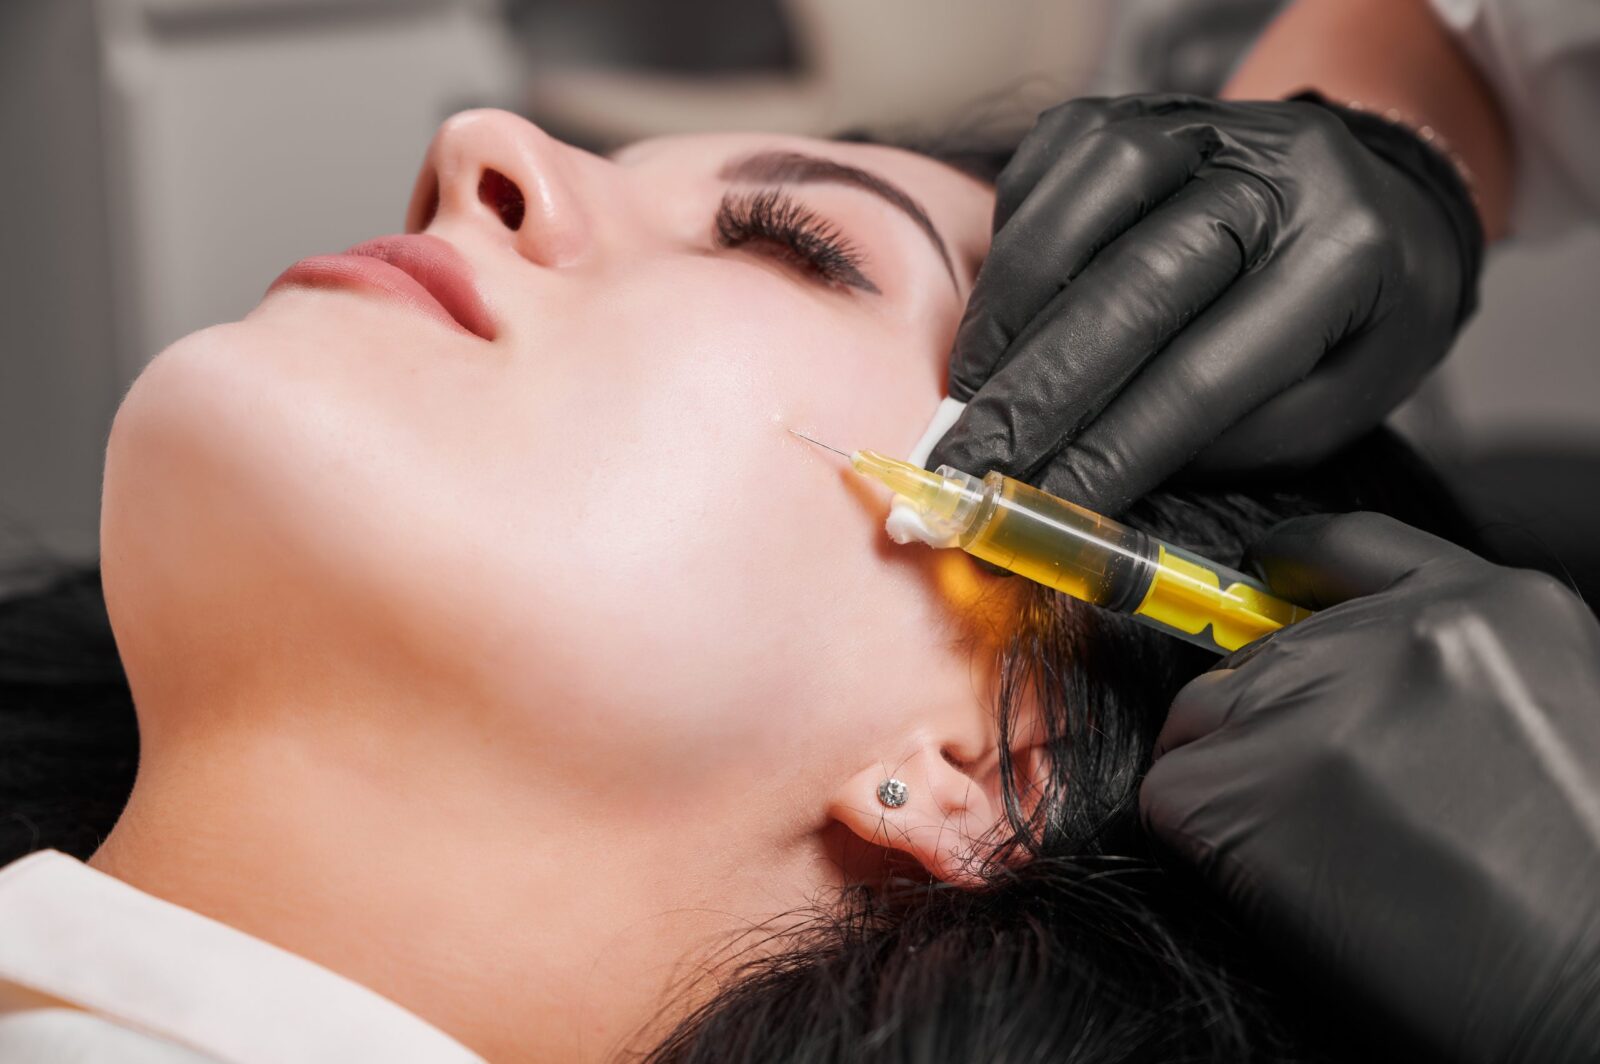 Close-up of plasmolifting procedure injection. Doctor cosmetologist beautician in black sterile gloves making injection in female patient face. Concept of skincare treatment.